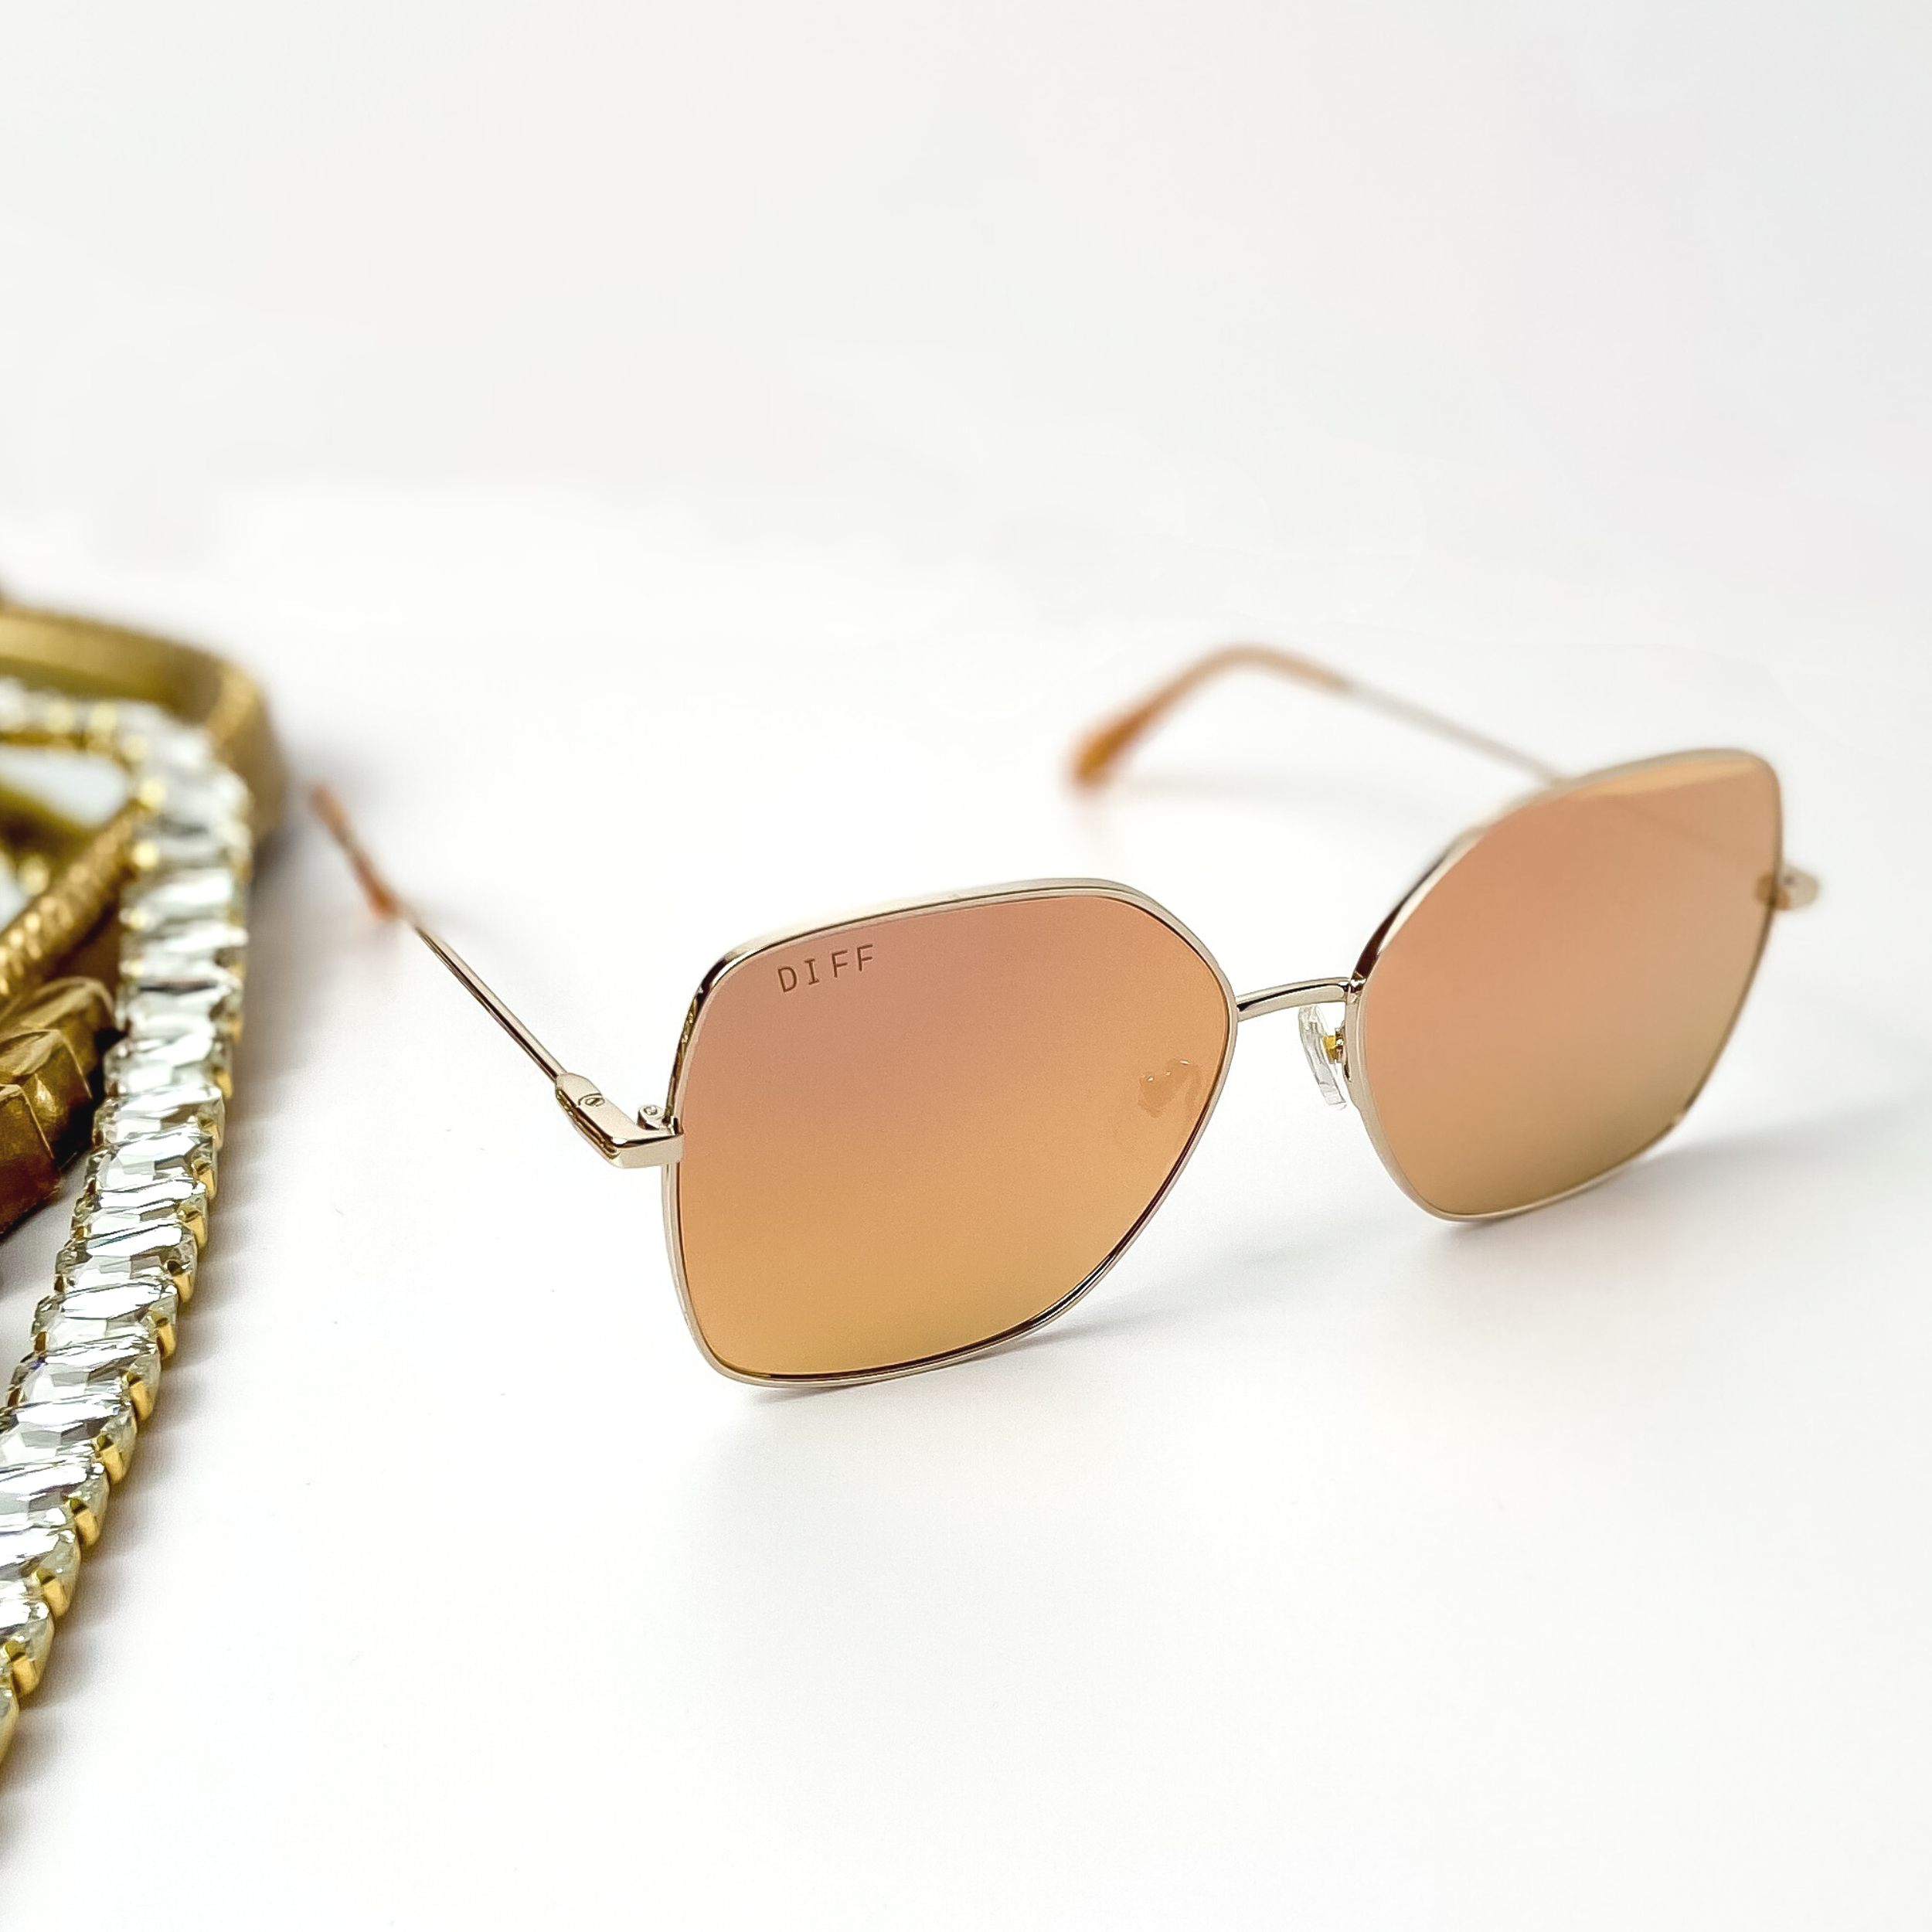 A pair of gold tone sunglasses with peach orange mirror lenses. Pictured on a white background with gold jewelry.